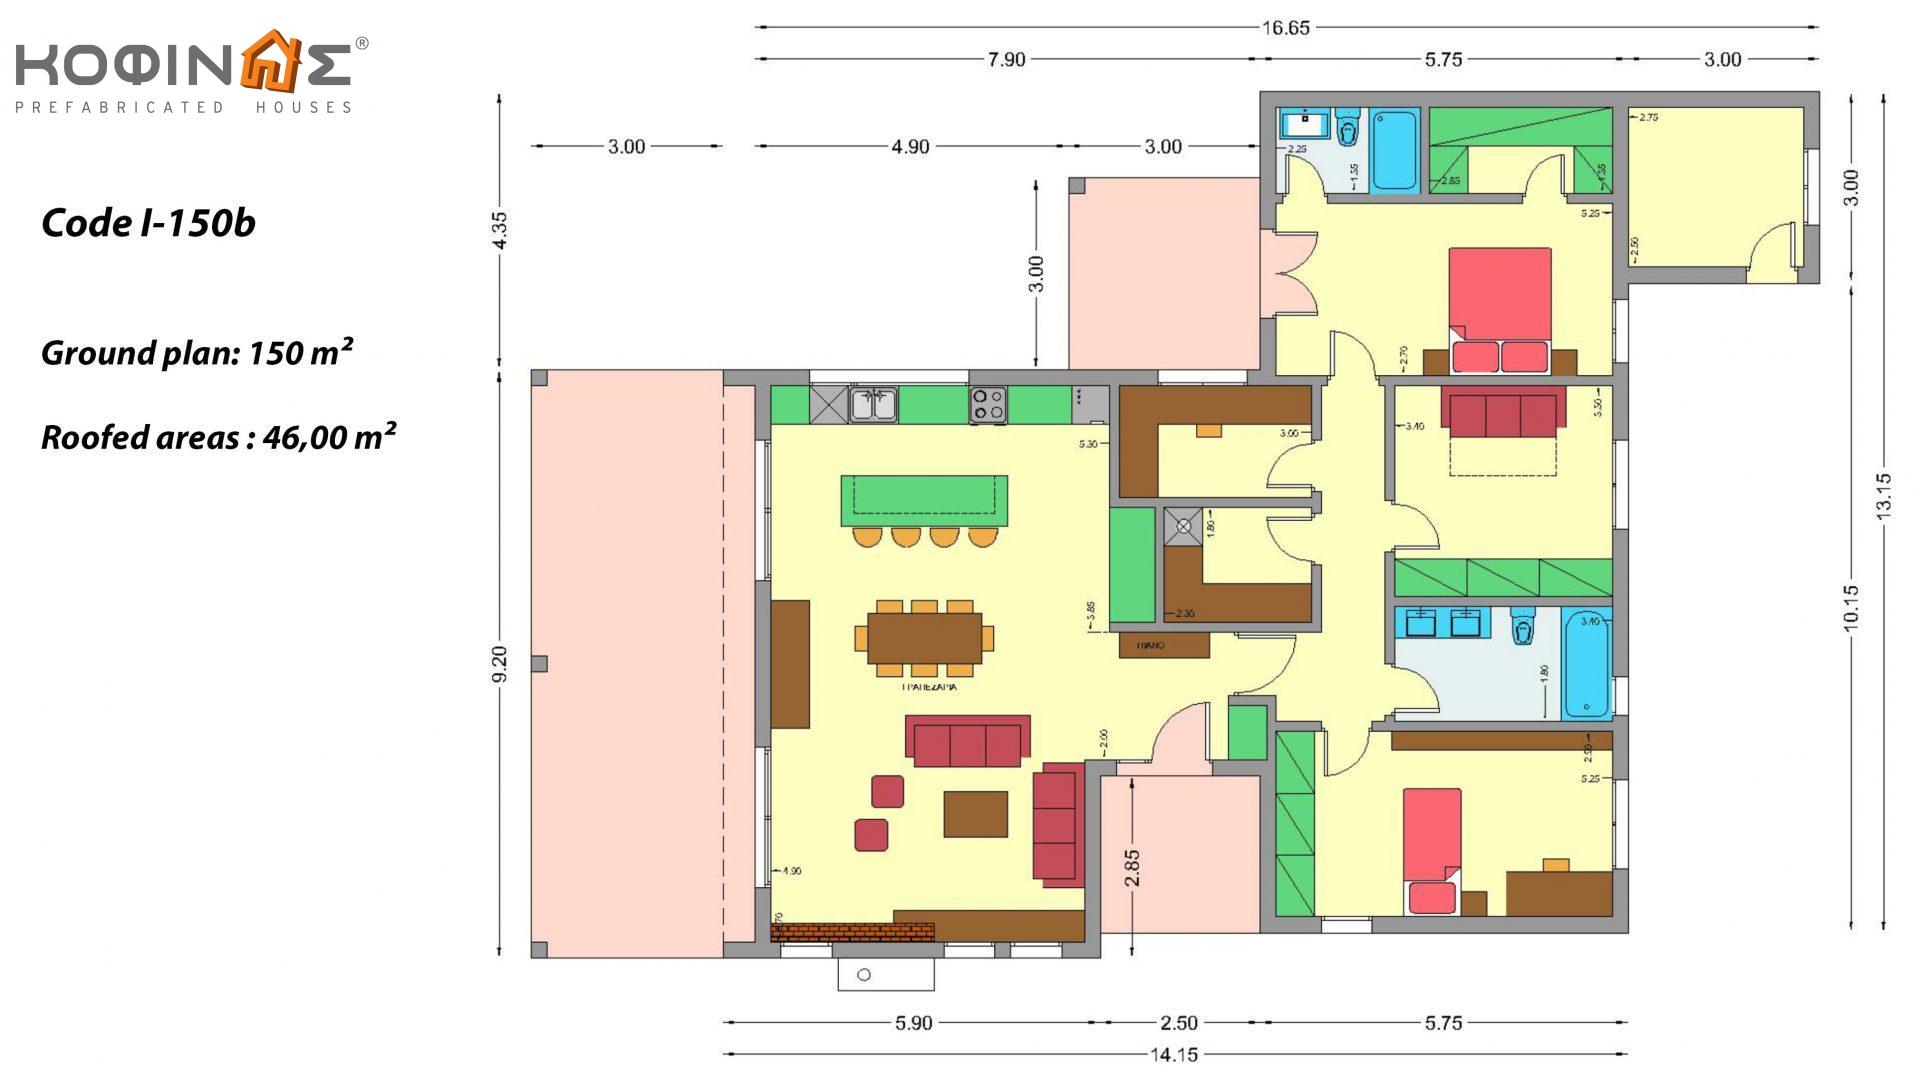 1-story house Ι-150b, total surface of 150 m², covered roofed areas 46,00 m²